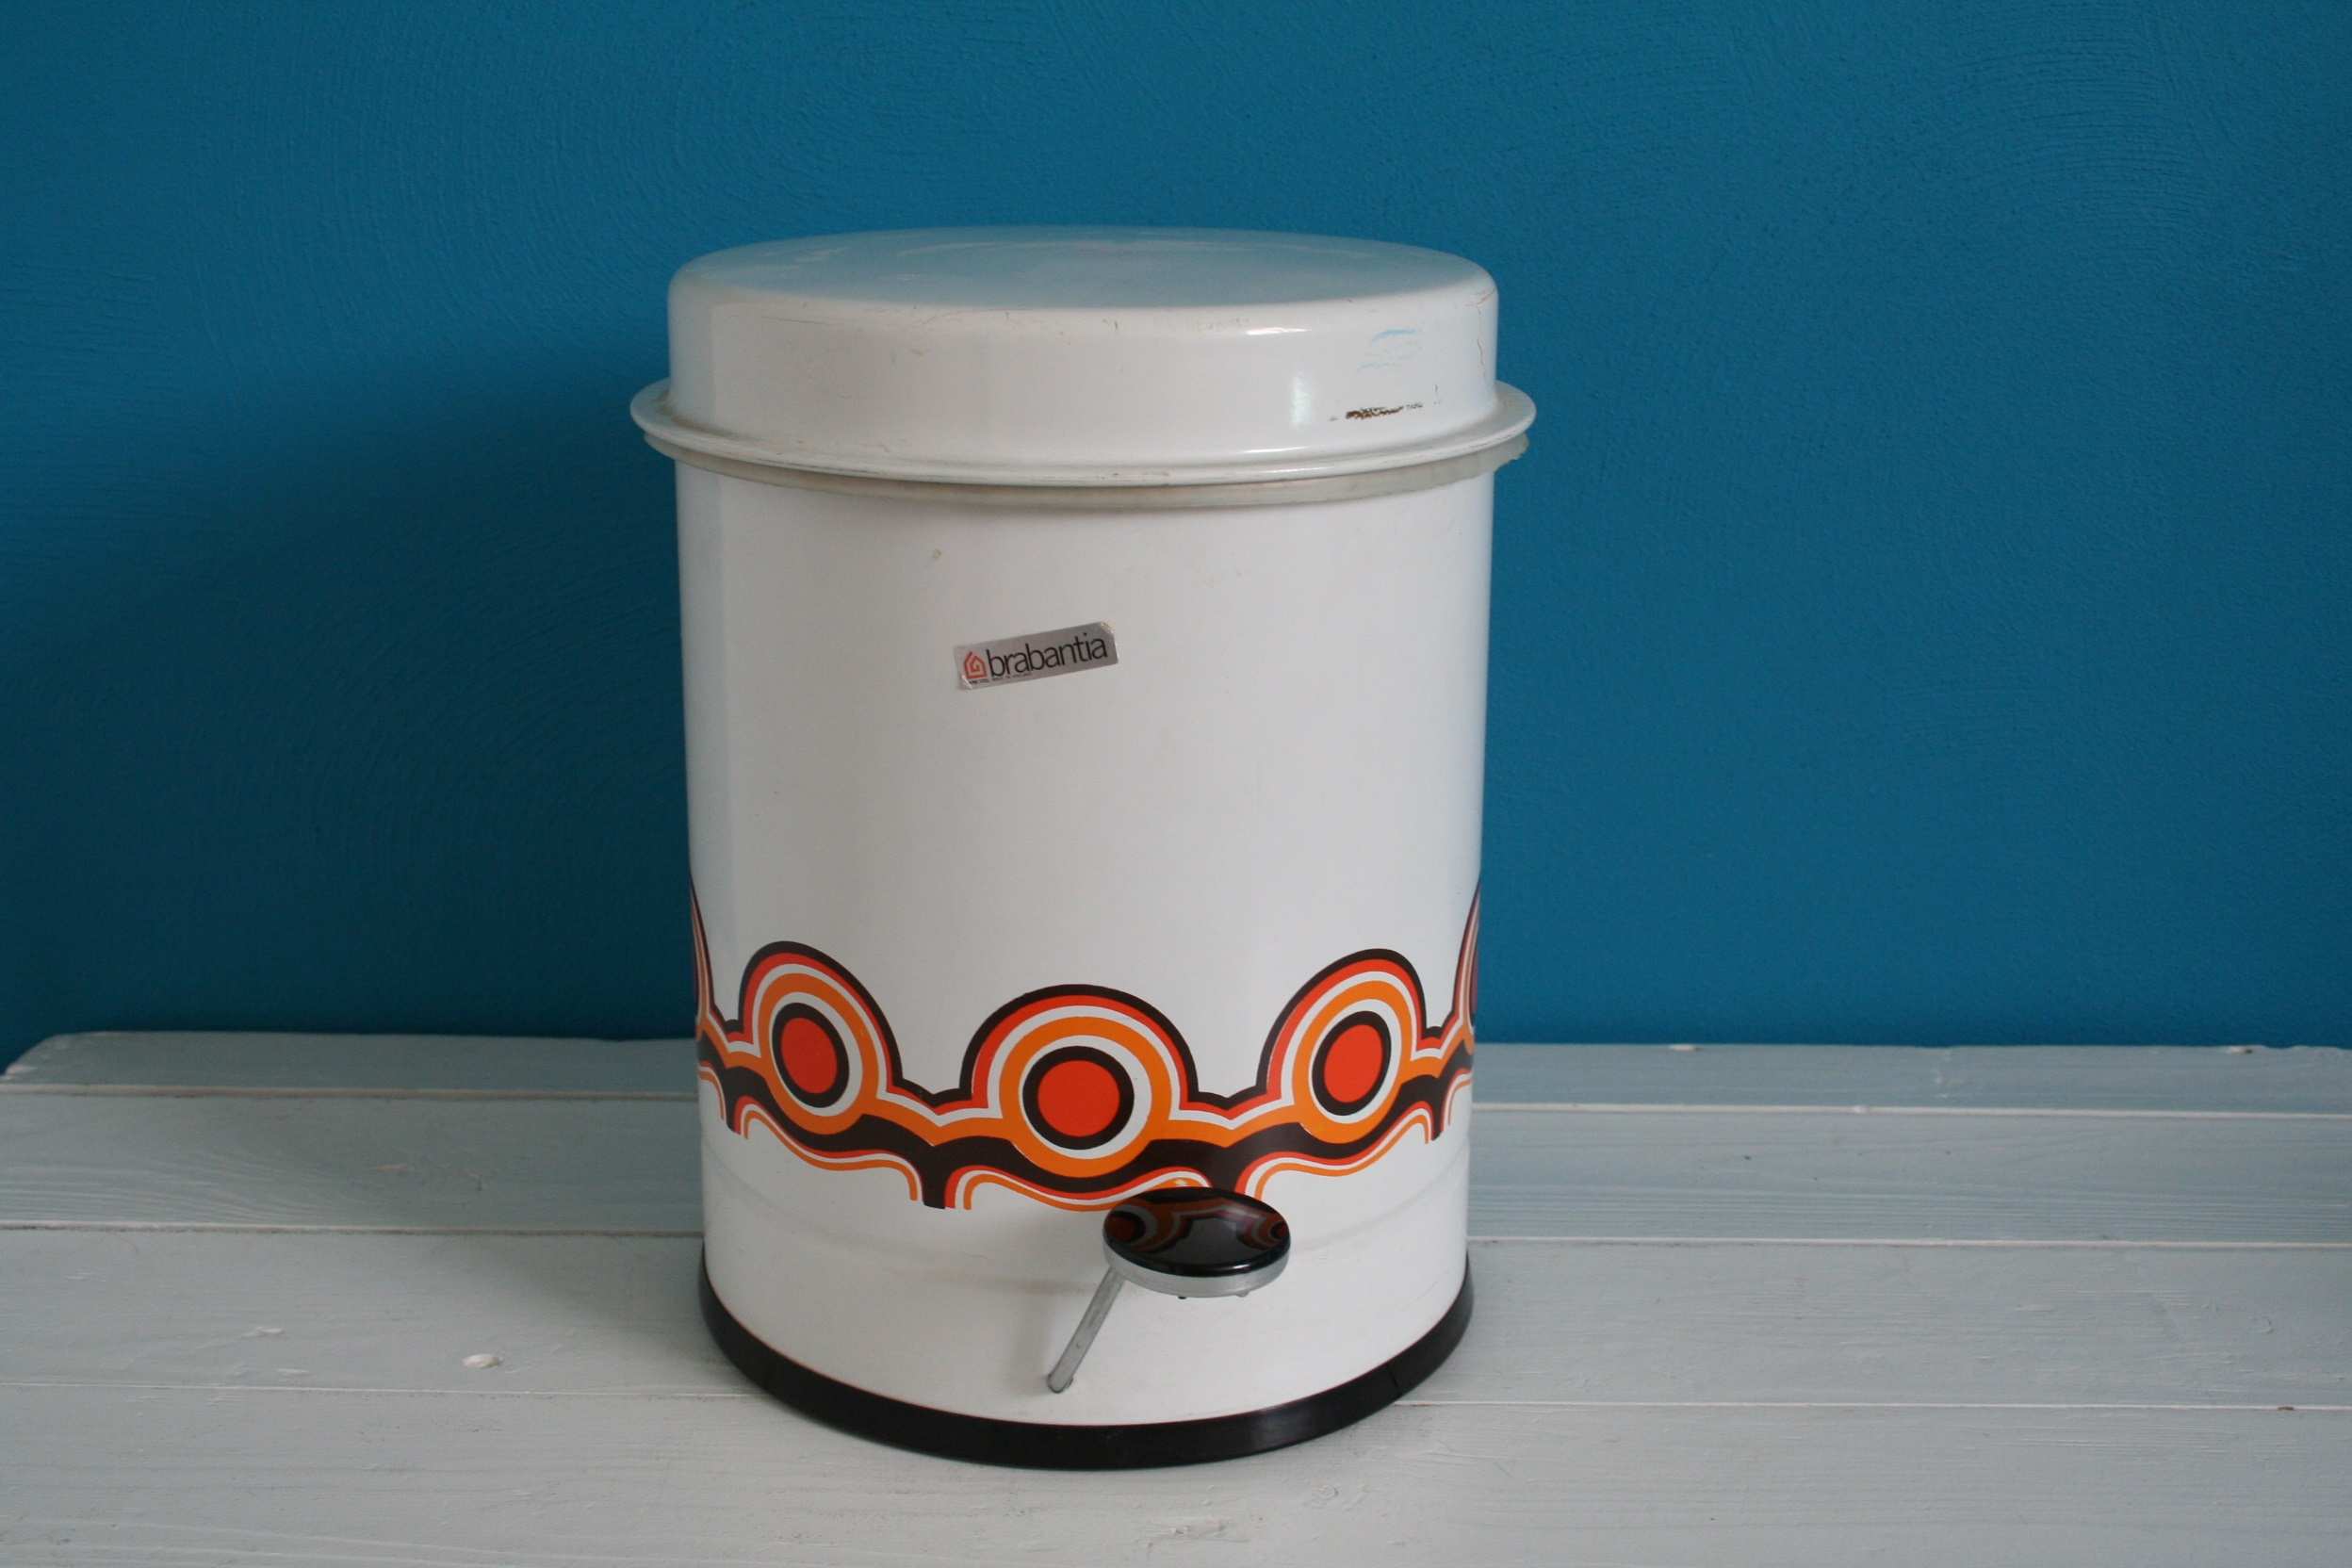 Colin Bisset's Iconic Designs: The Pedal Bin